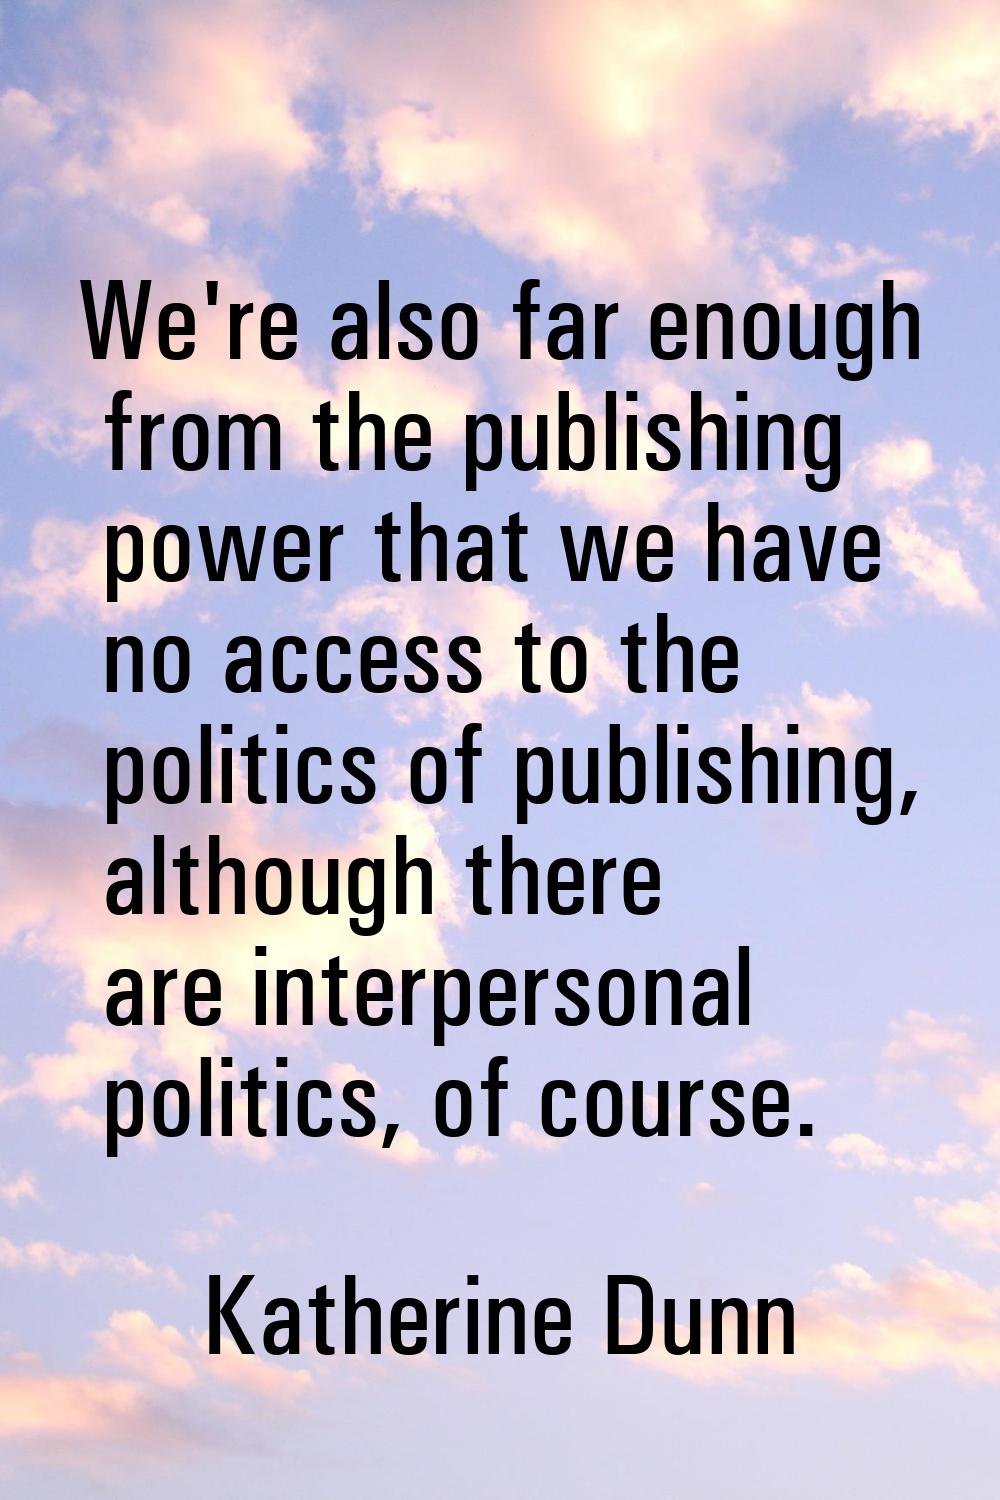 We're also far enough from the publishing power that we have no access to the politics of publishin